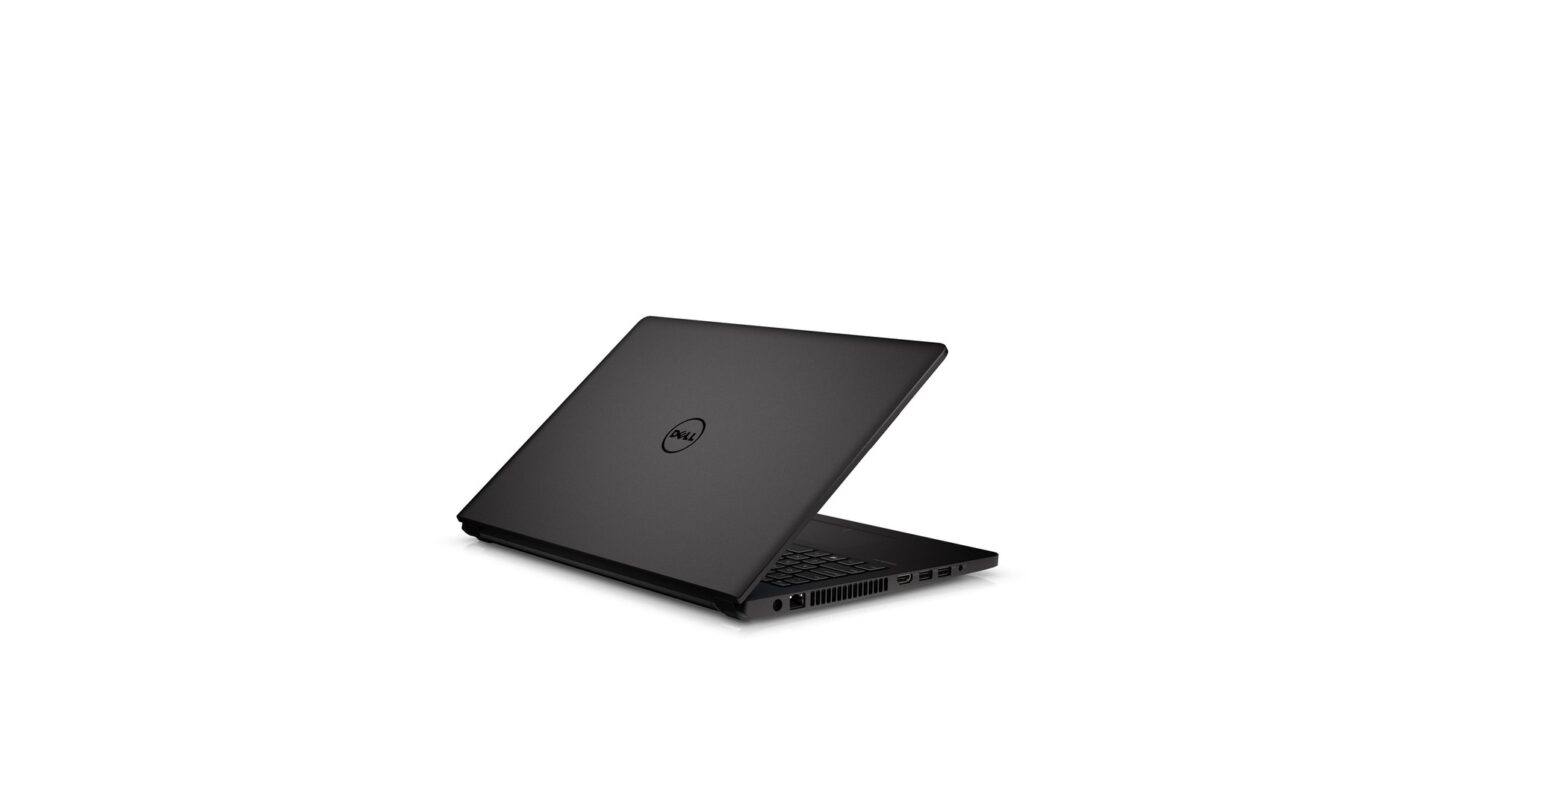 Dell Latitude 3000 Series Notebook featured